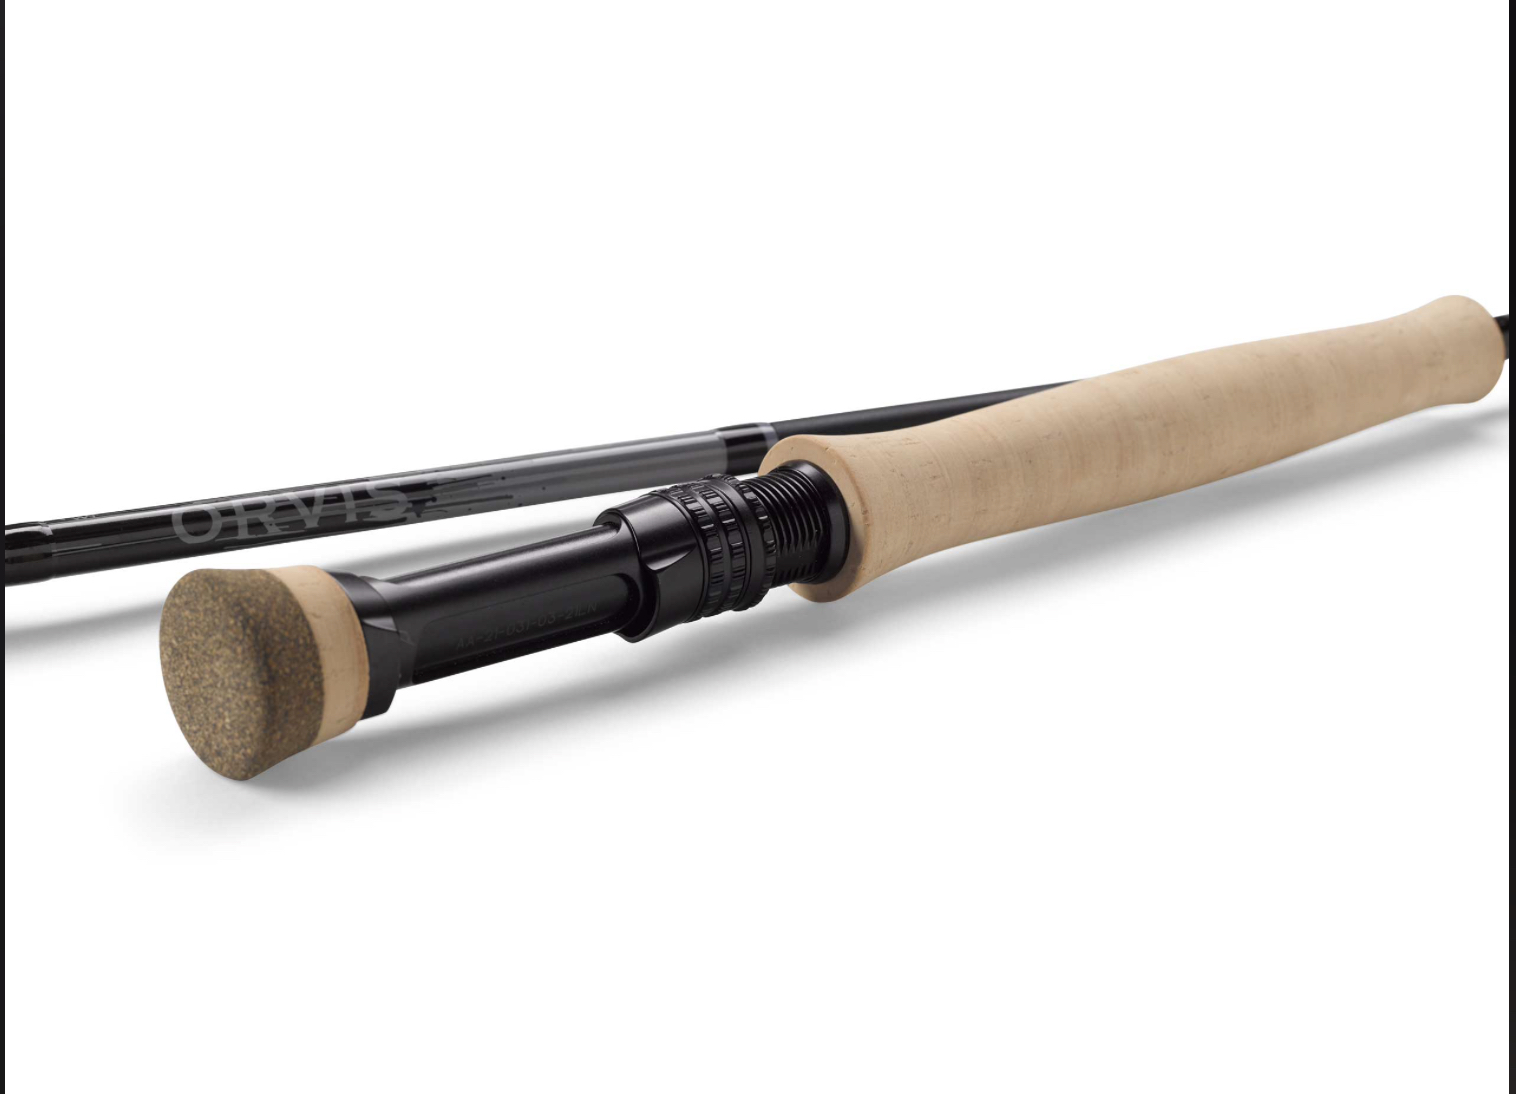 Orvis Helios 3F 11' 3-weight Blackout Fly Rod